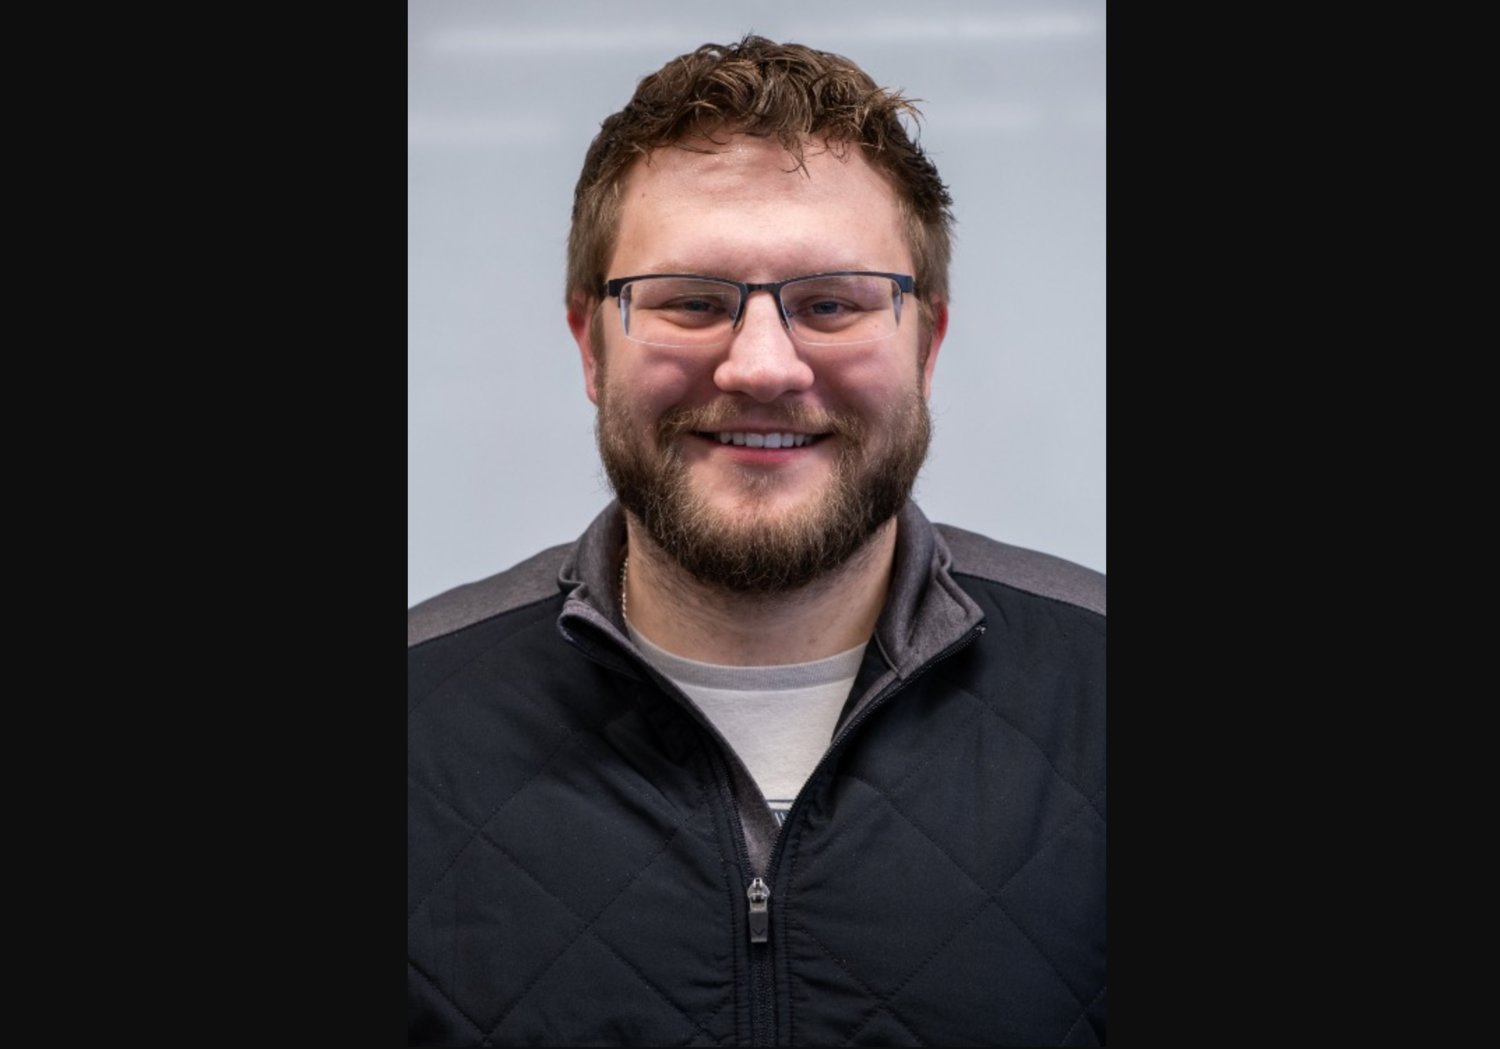 Centralia College’s new esports coach, Brent Shepherd, is already making big plans for the team, the college announced in a news release earlier this week. 